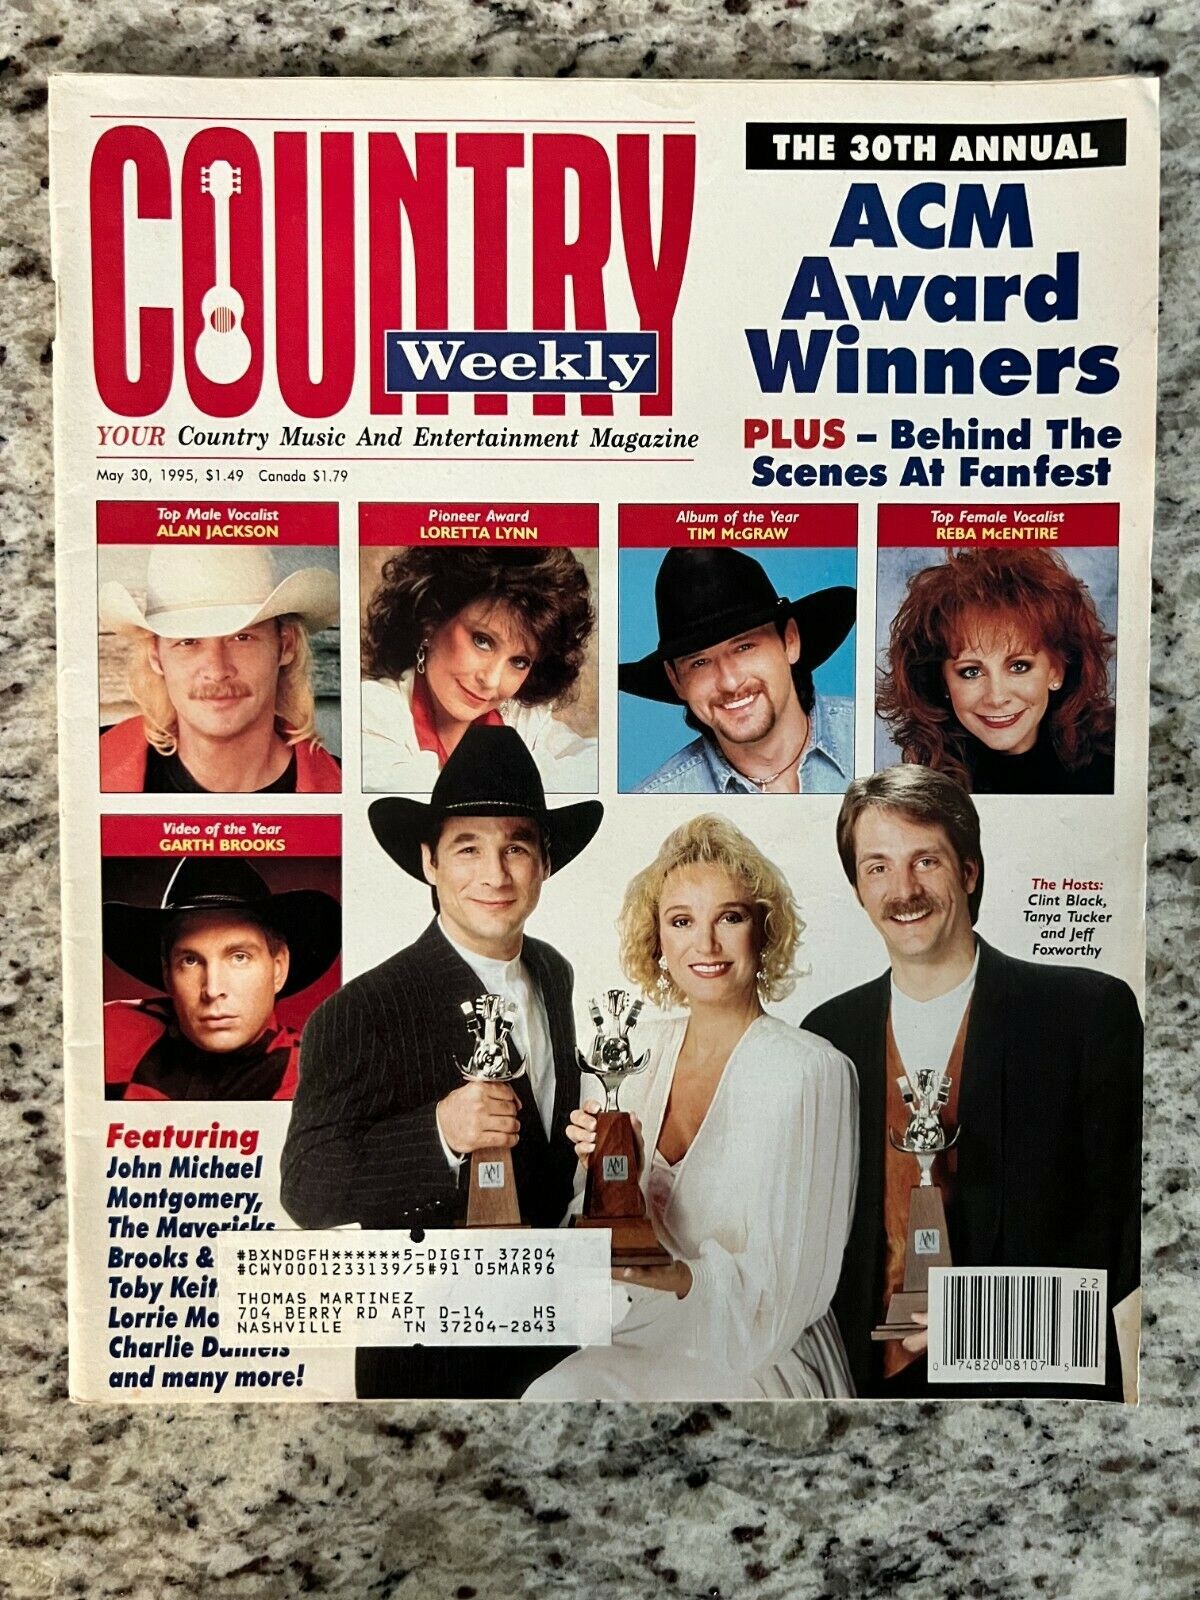 Country Weekly Magazine, 05/30/1995, 30th ACM Award Winners on cover.